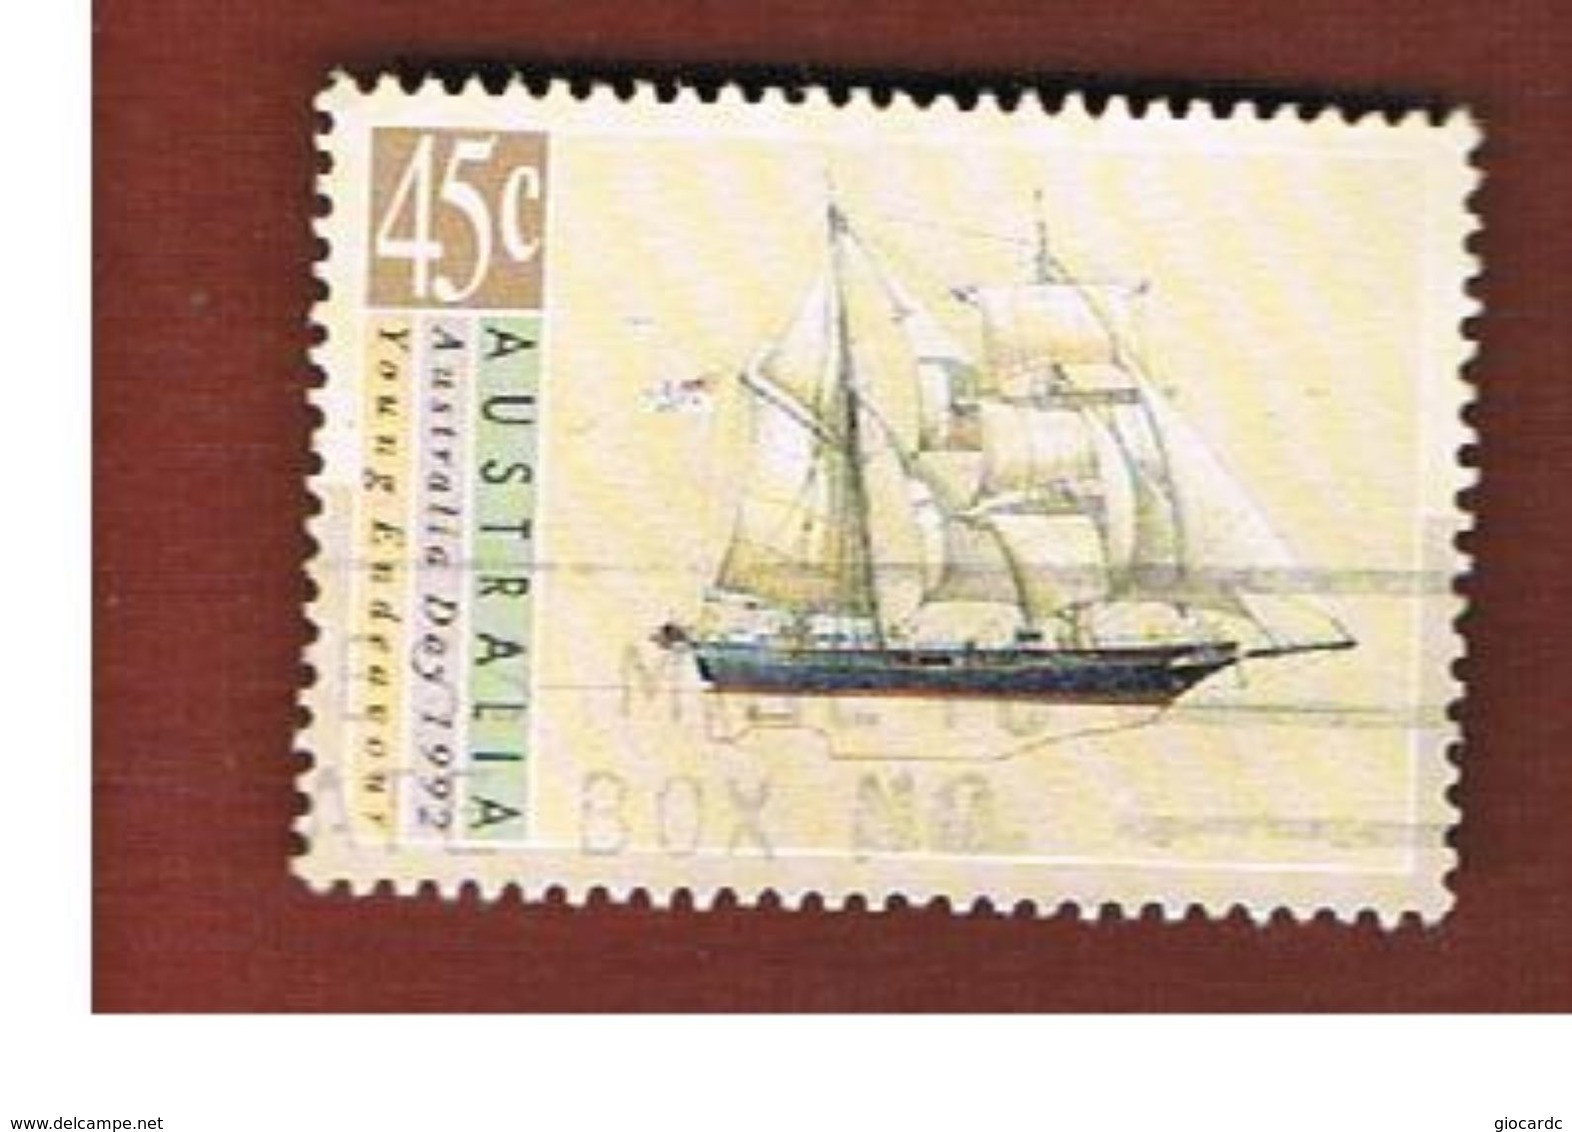 AUSTRALIA  -  SG 1333  -      1992 SHIPS: YOUNG ENDEAVOUR           -       USED - Gebraucht